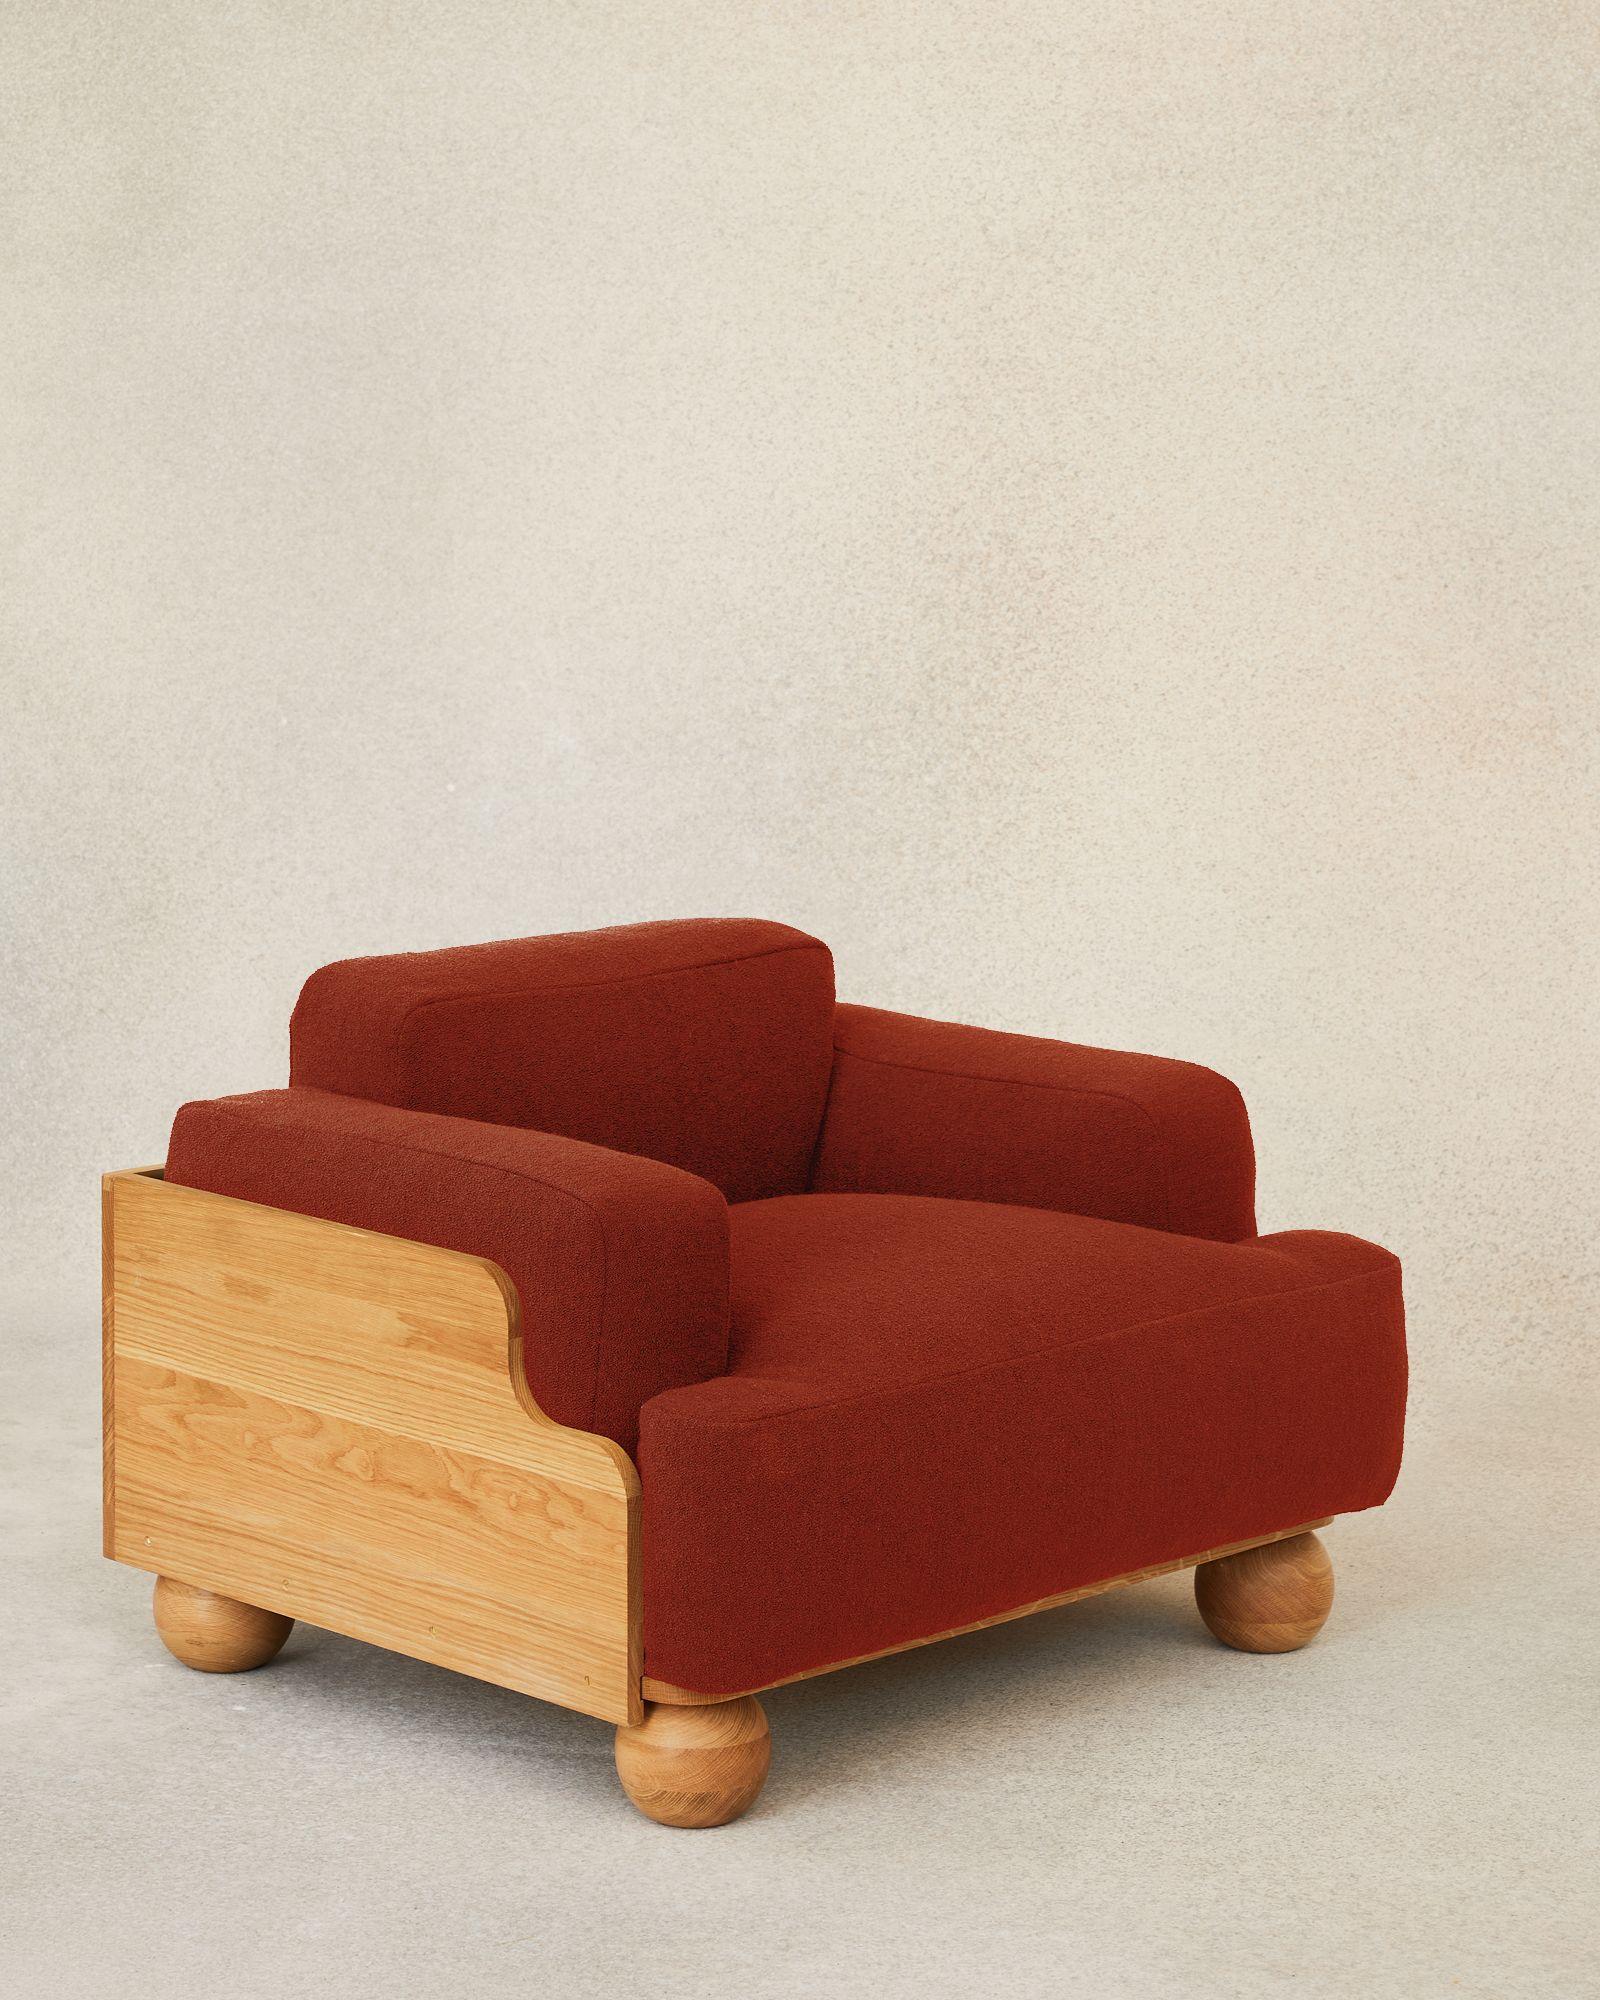 Cove armchair by Fred Rigby Studio
Dimensions: L 93.8 x W 77 x H 65 cm
Materials: Solid Oak, Bouclé Weave Wool, Upholstered Cushion
Variations of colours available.

Fred Rigby Studio is a London-based furniture and interior design practice